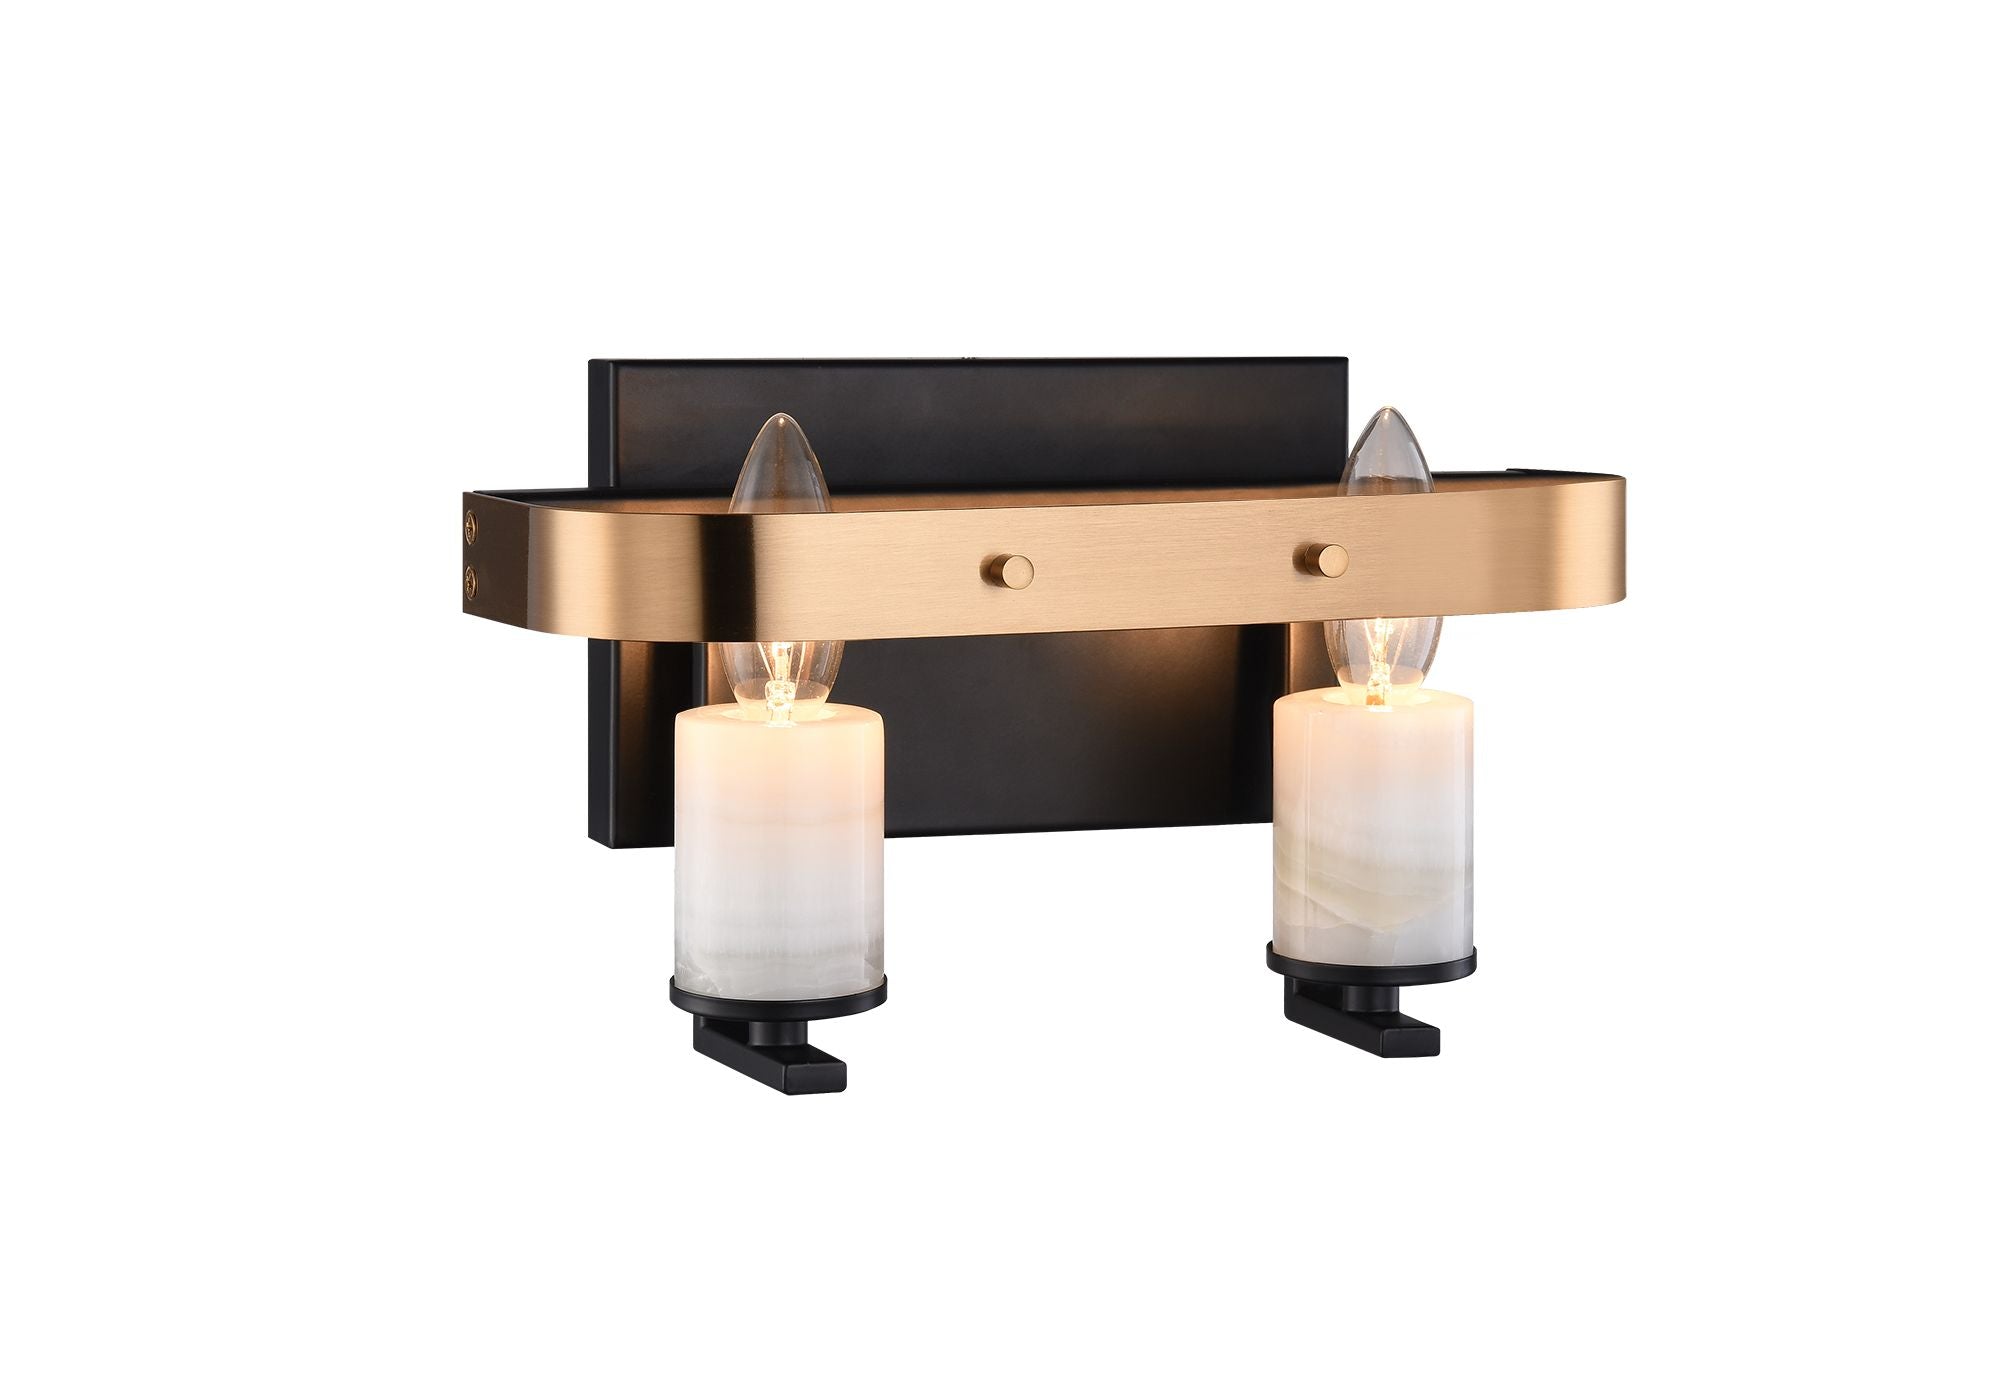 CRANDLE Wall sconce Black, Gold - W82902BKAG | TEO